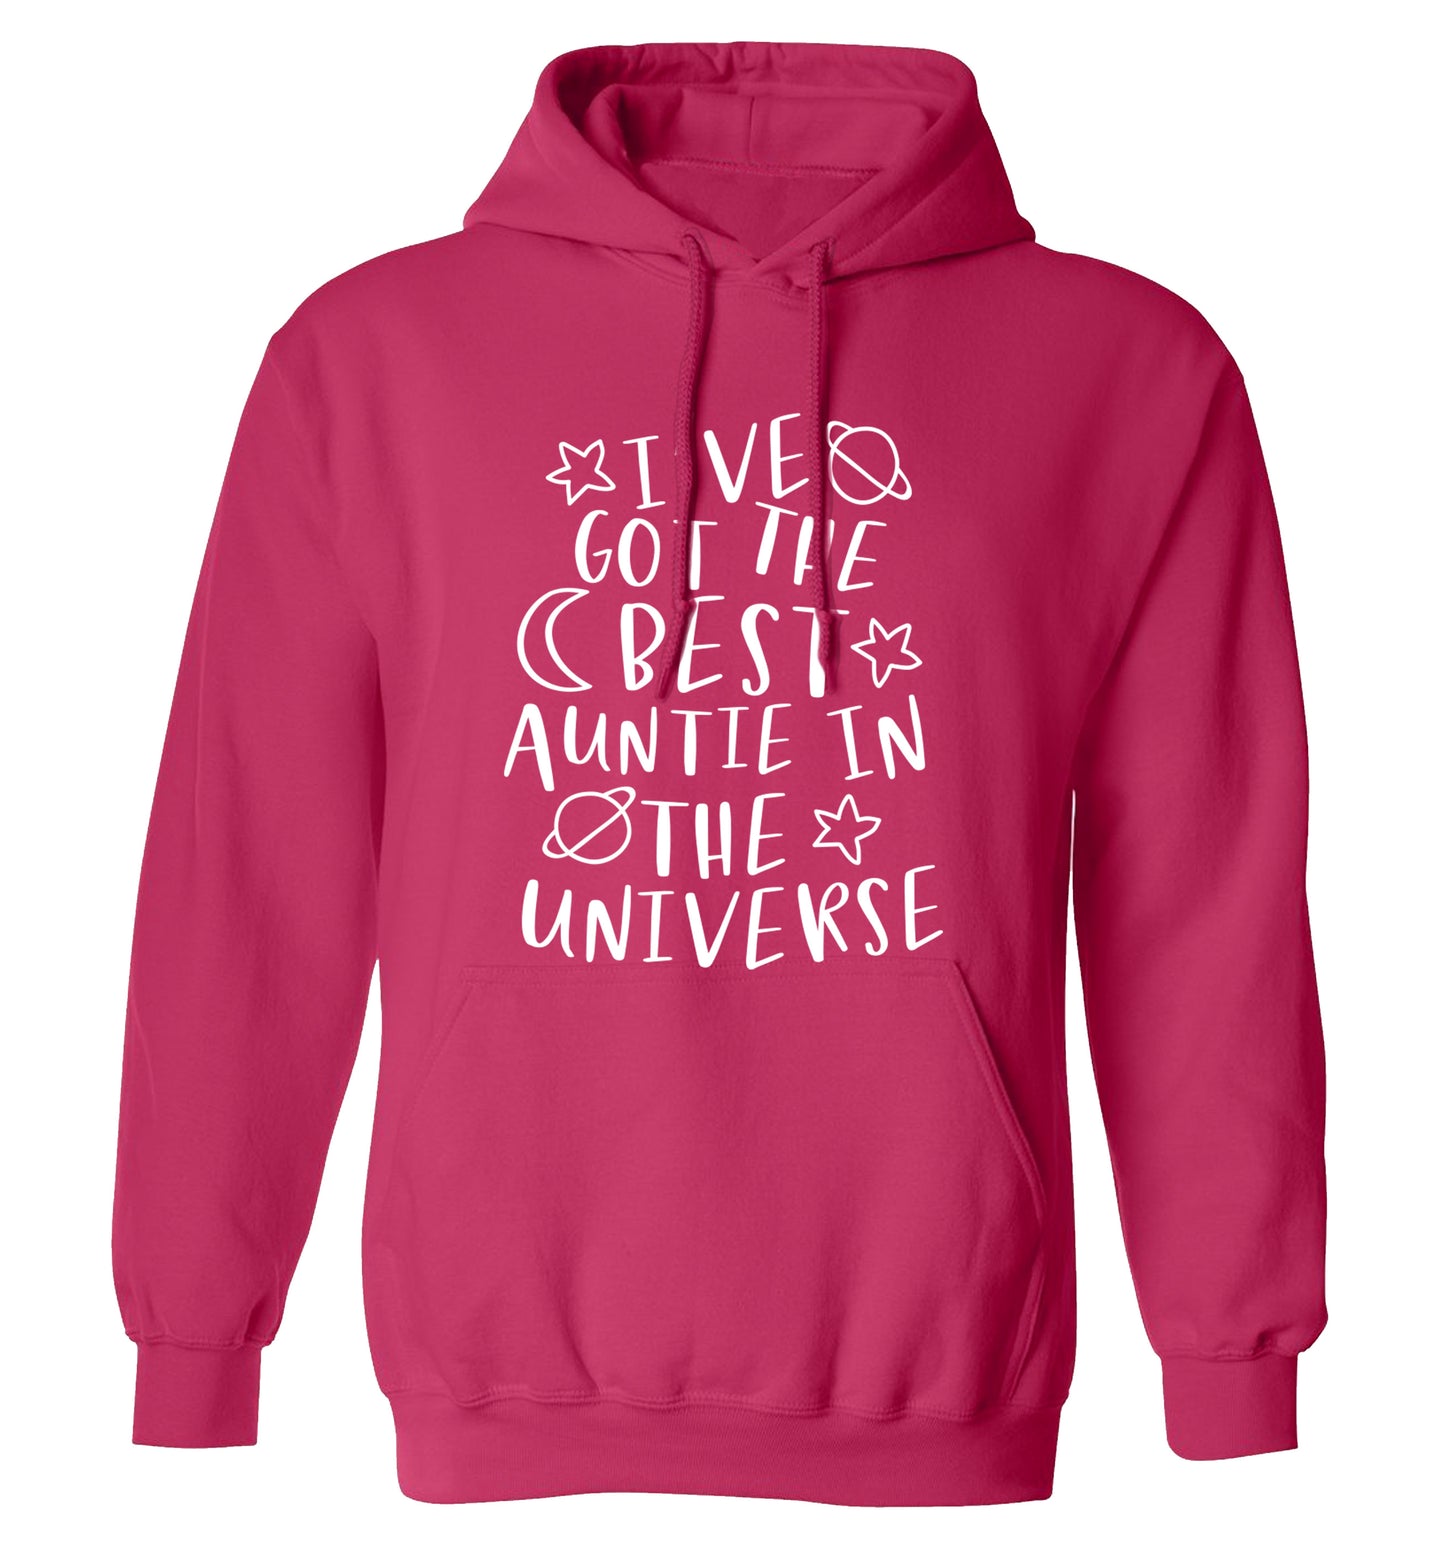 I've got the best auntie in the universe adults unisex pink hoodie 2XL